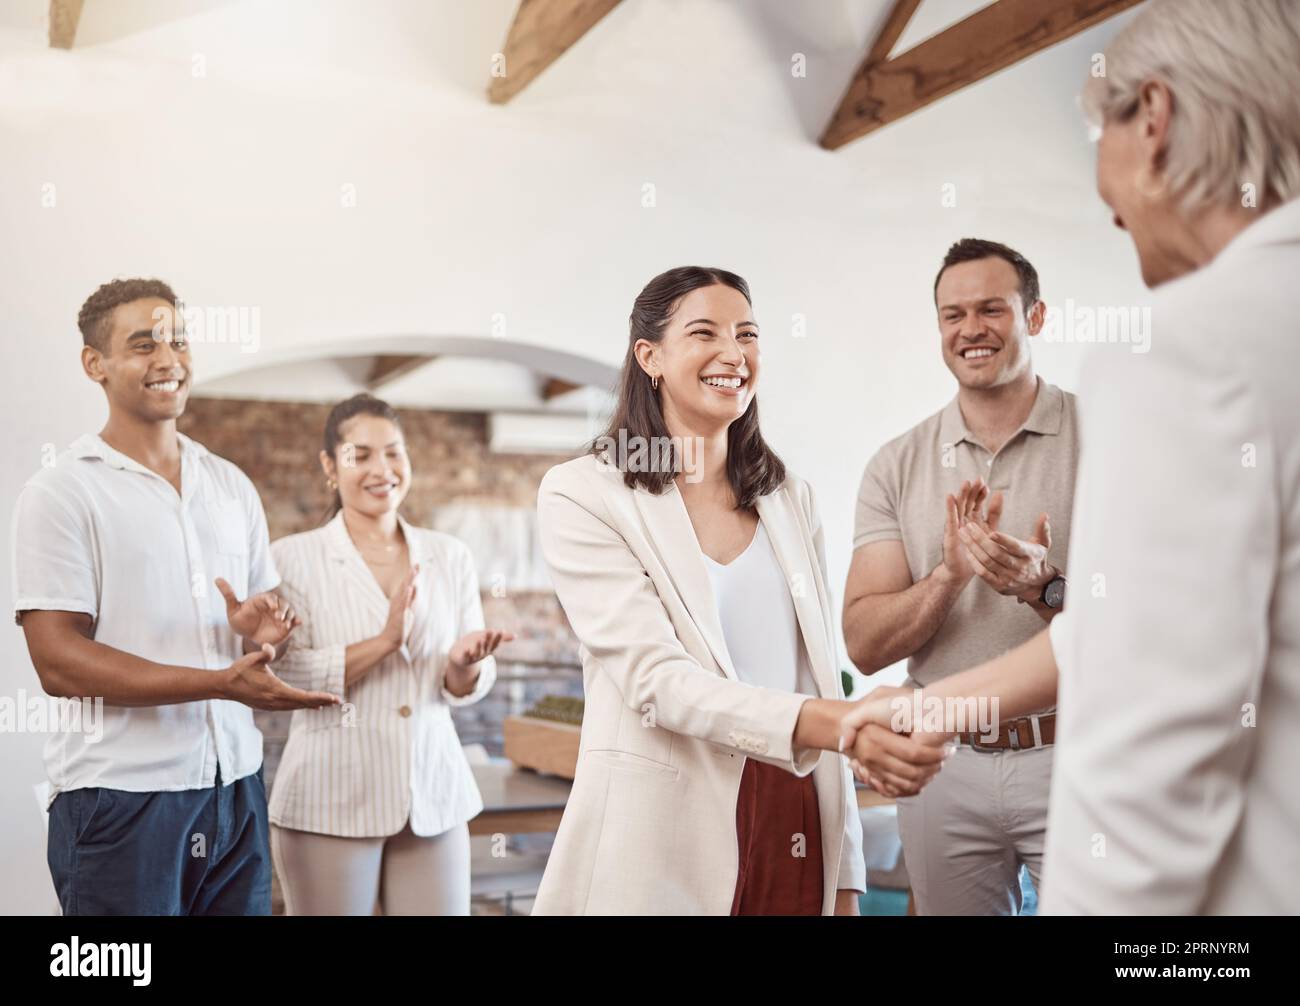 Business handshake with clapping workers in the work office. Professional company b2b shaking hands for a deal to come and work together. Diverse group of happy staff thank you and welcome employee Stock Photo